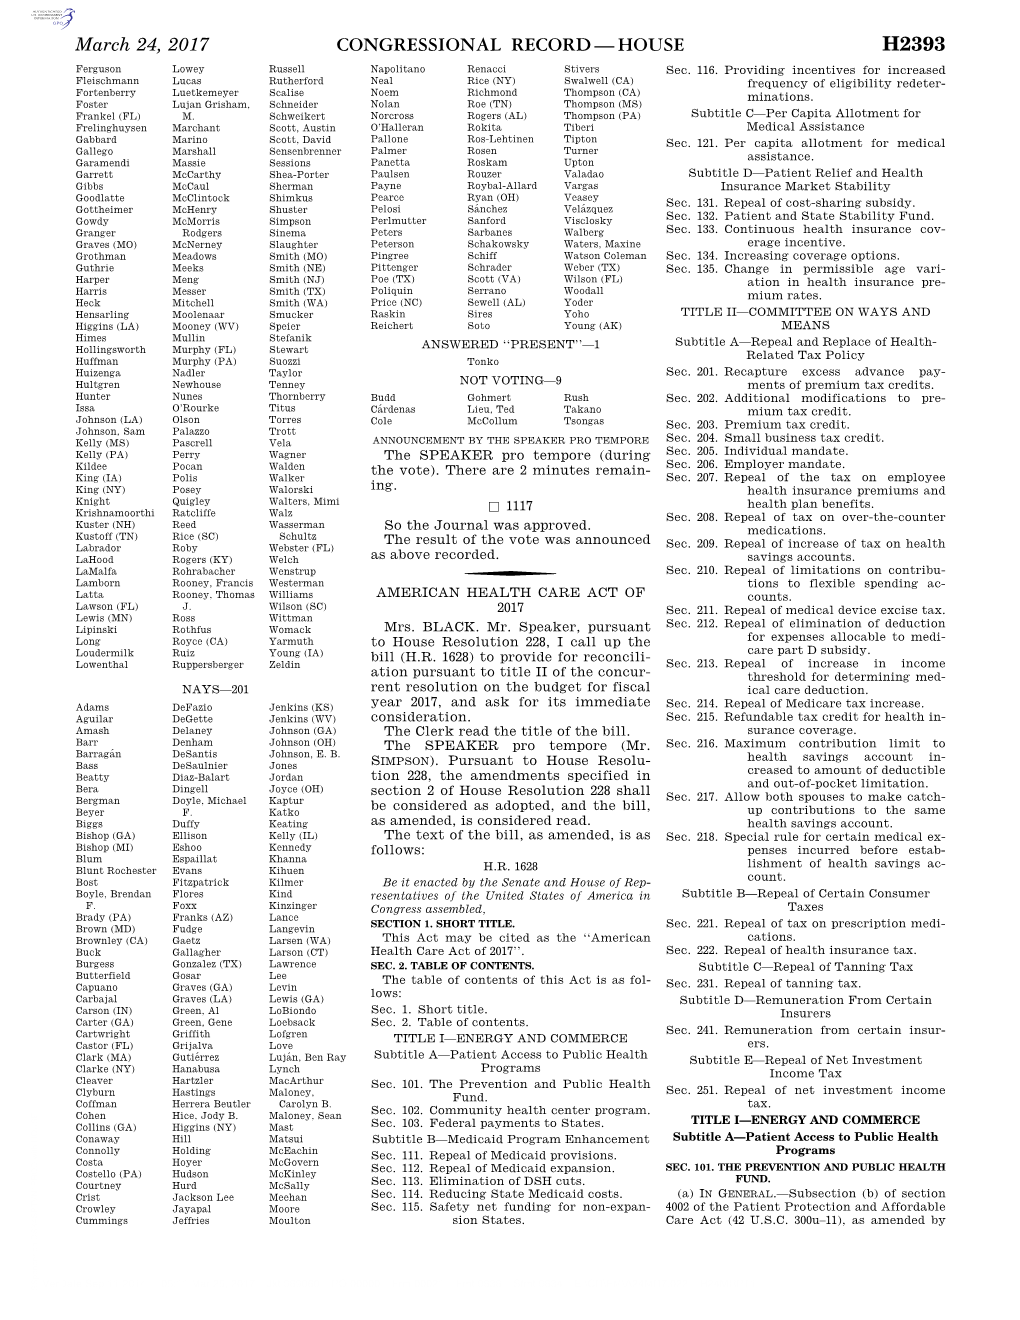 Congressional Record—House H2393